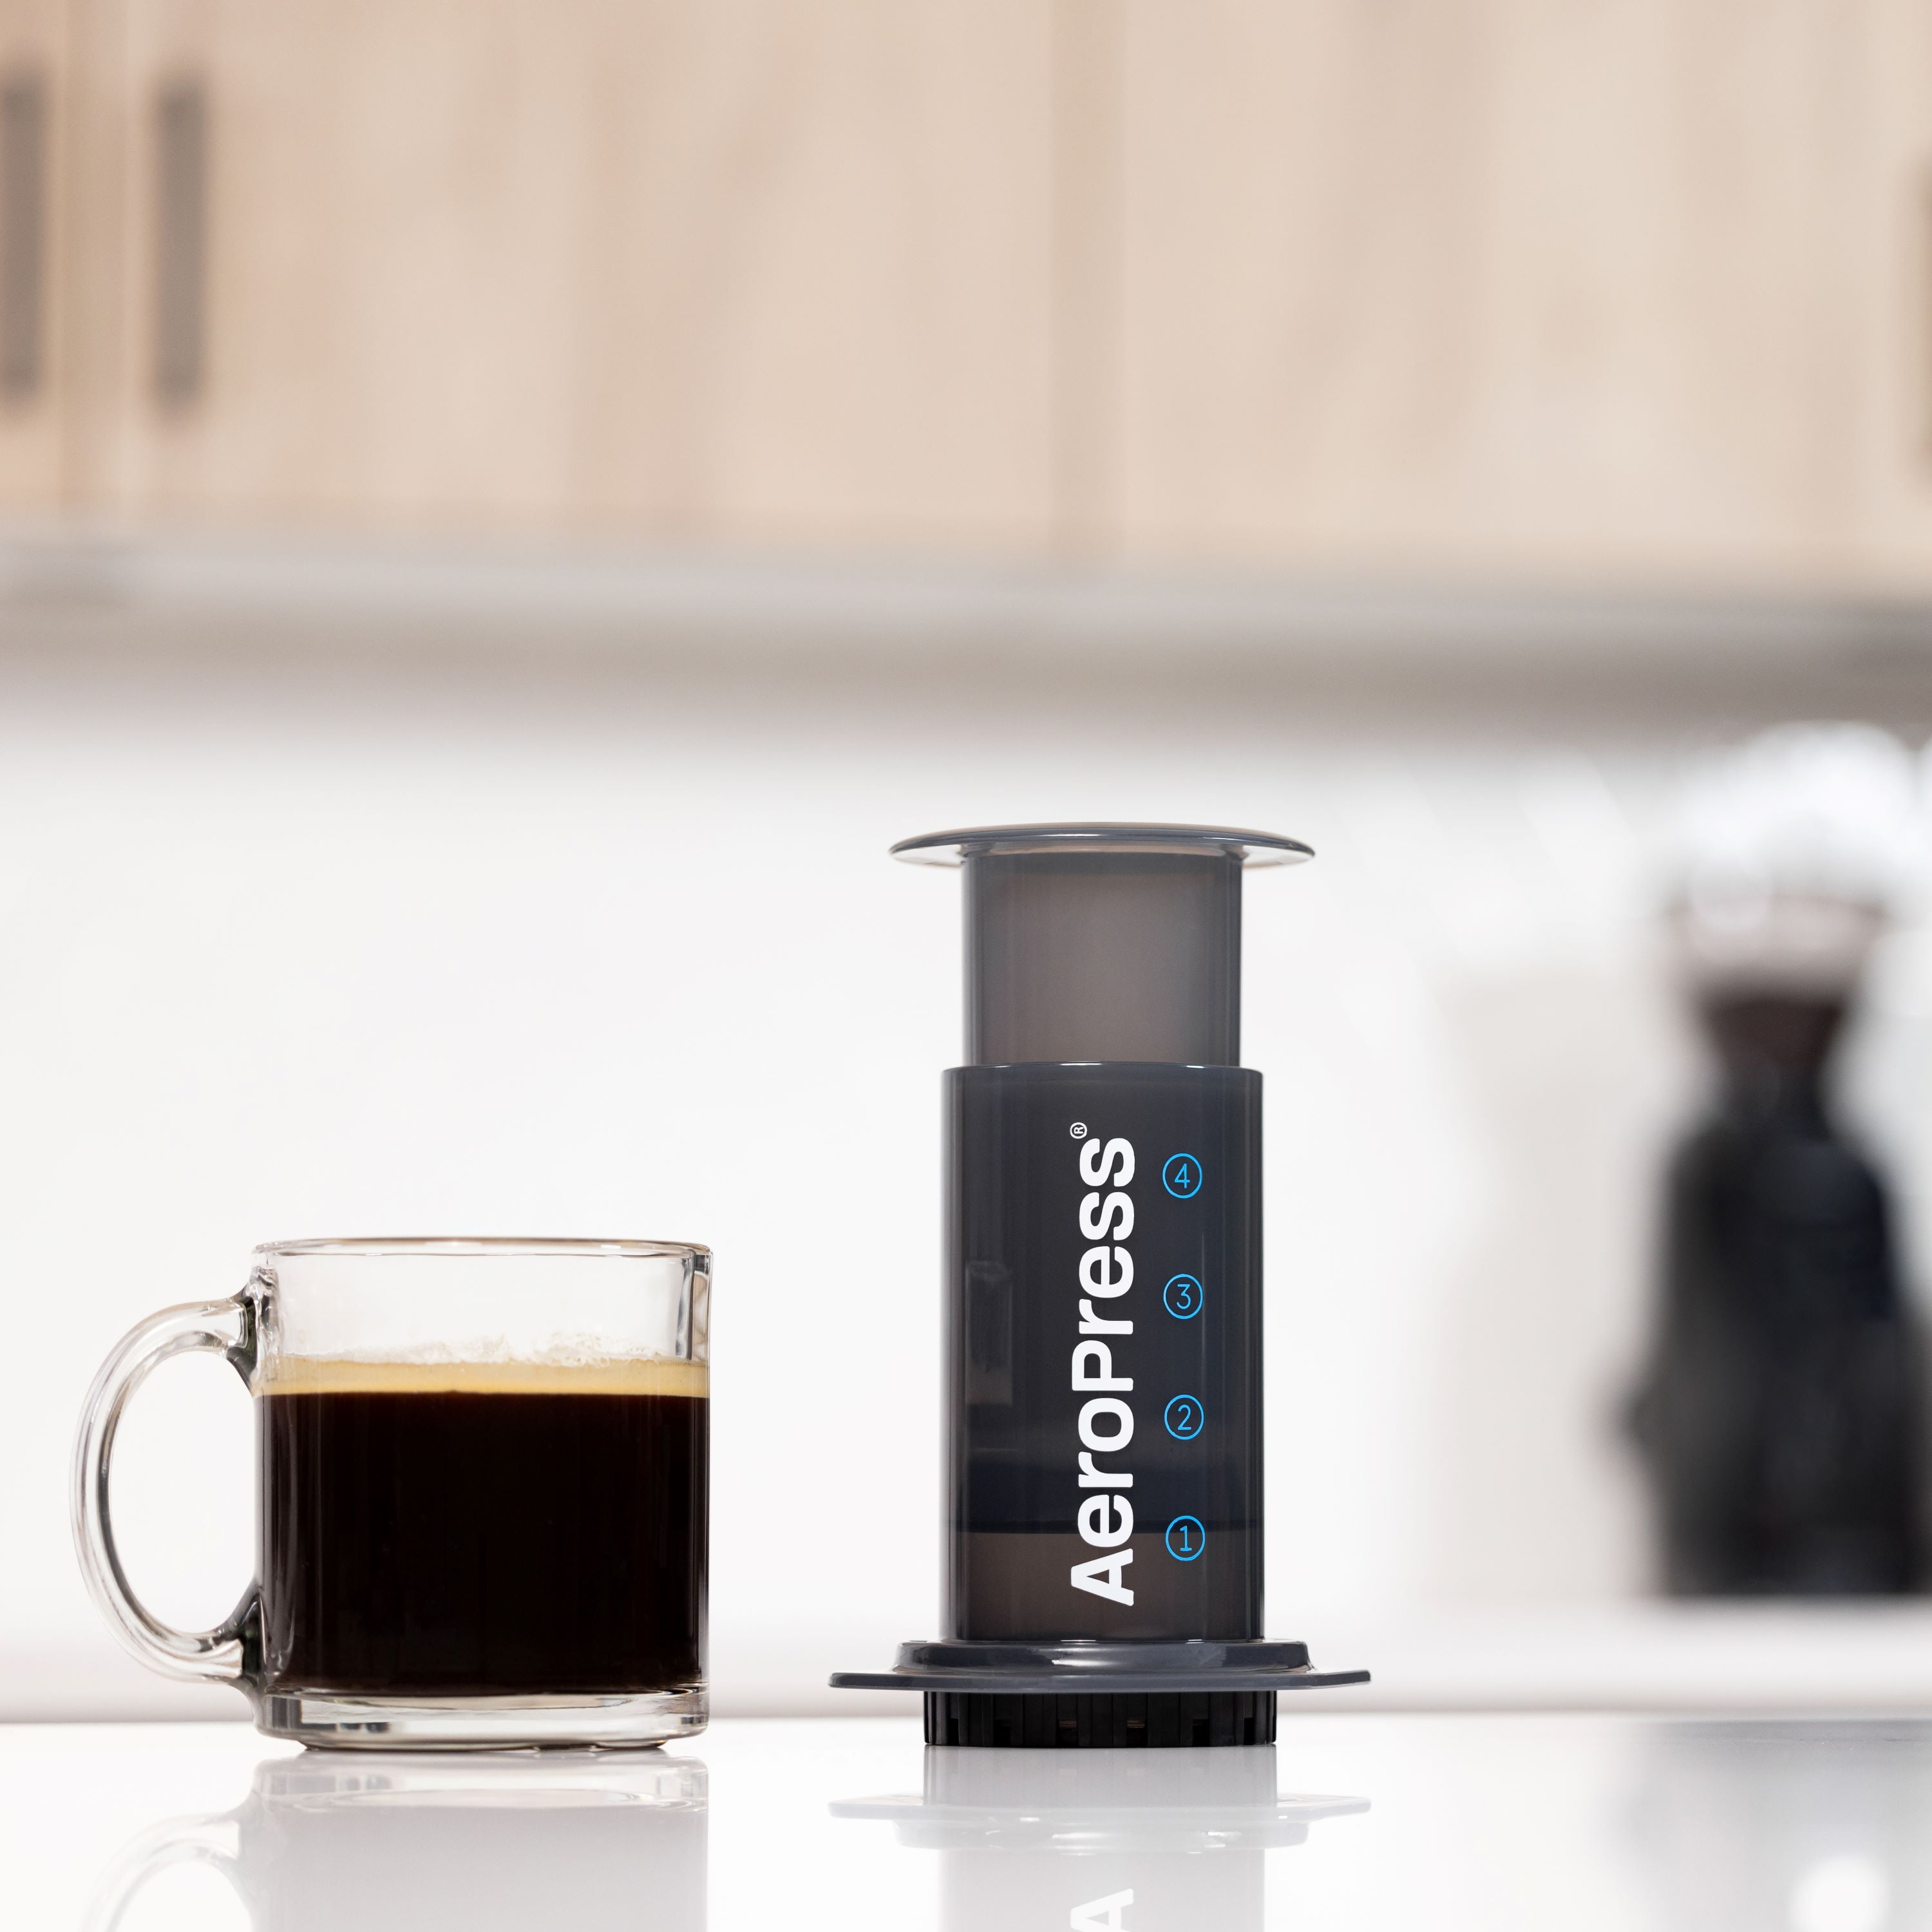 Aeropress XL Coffee Press – 3 in 1 brew method combines French Press,  Pourover, Espresso. Full bodied, smooth coffee without grit or bitterness.  Small